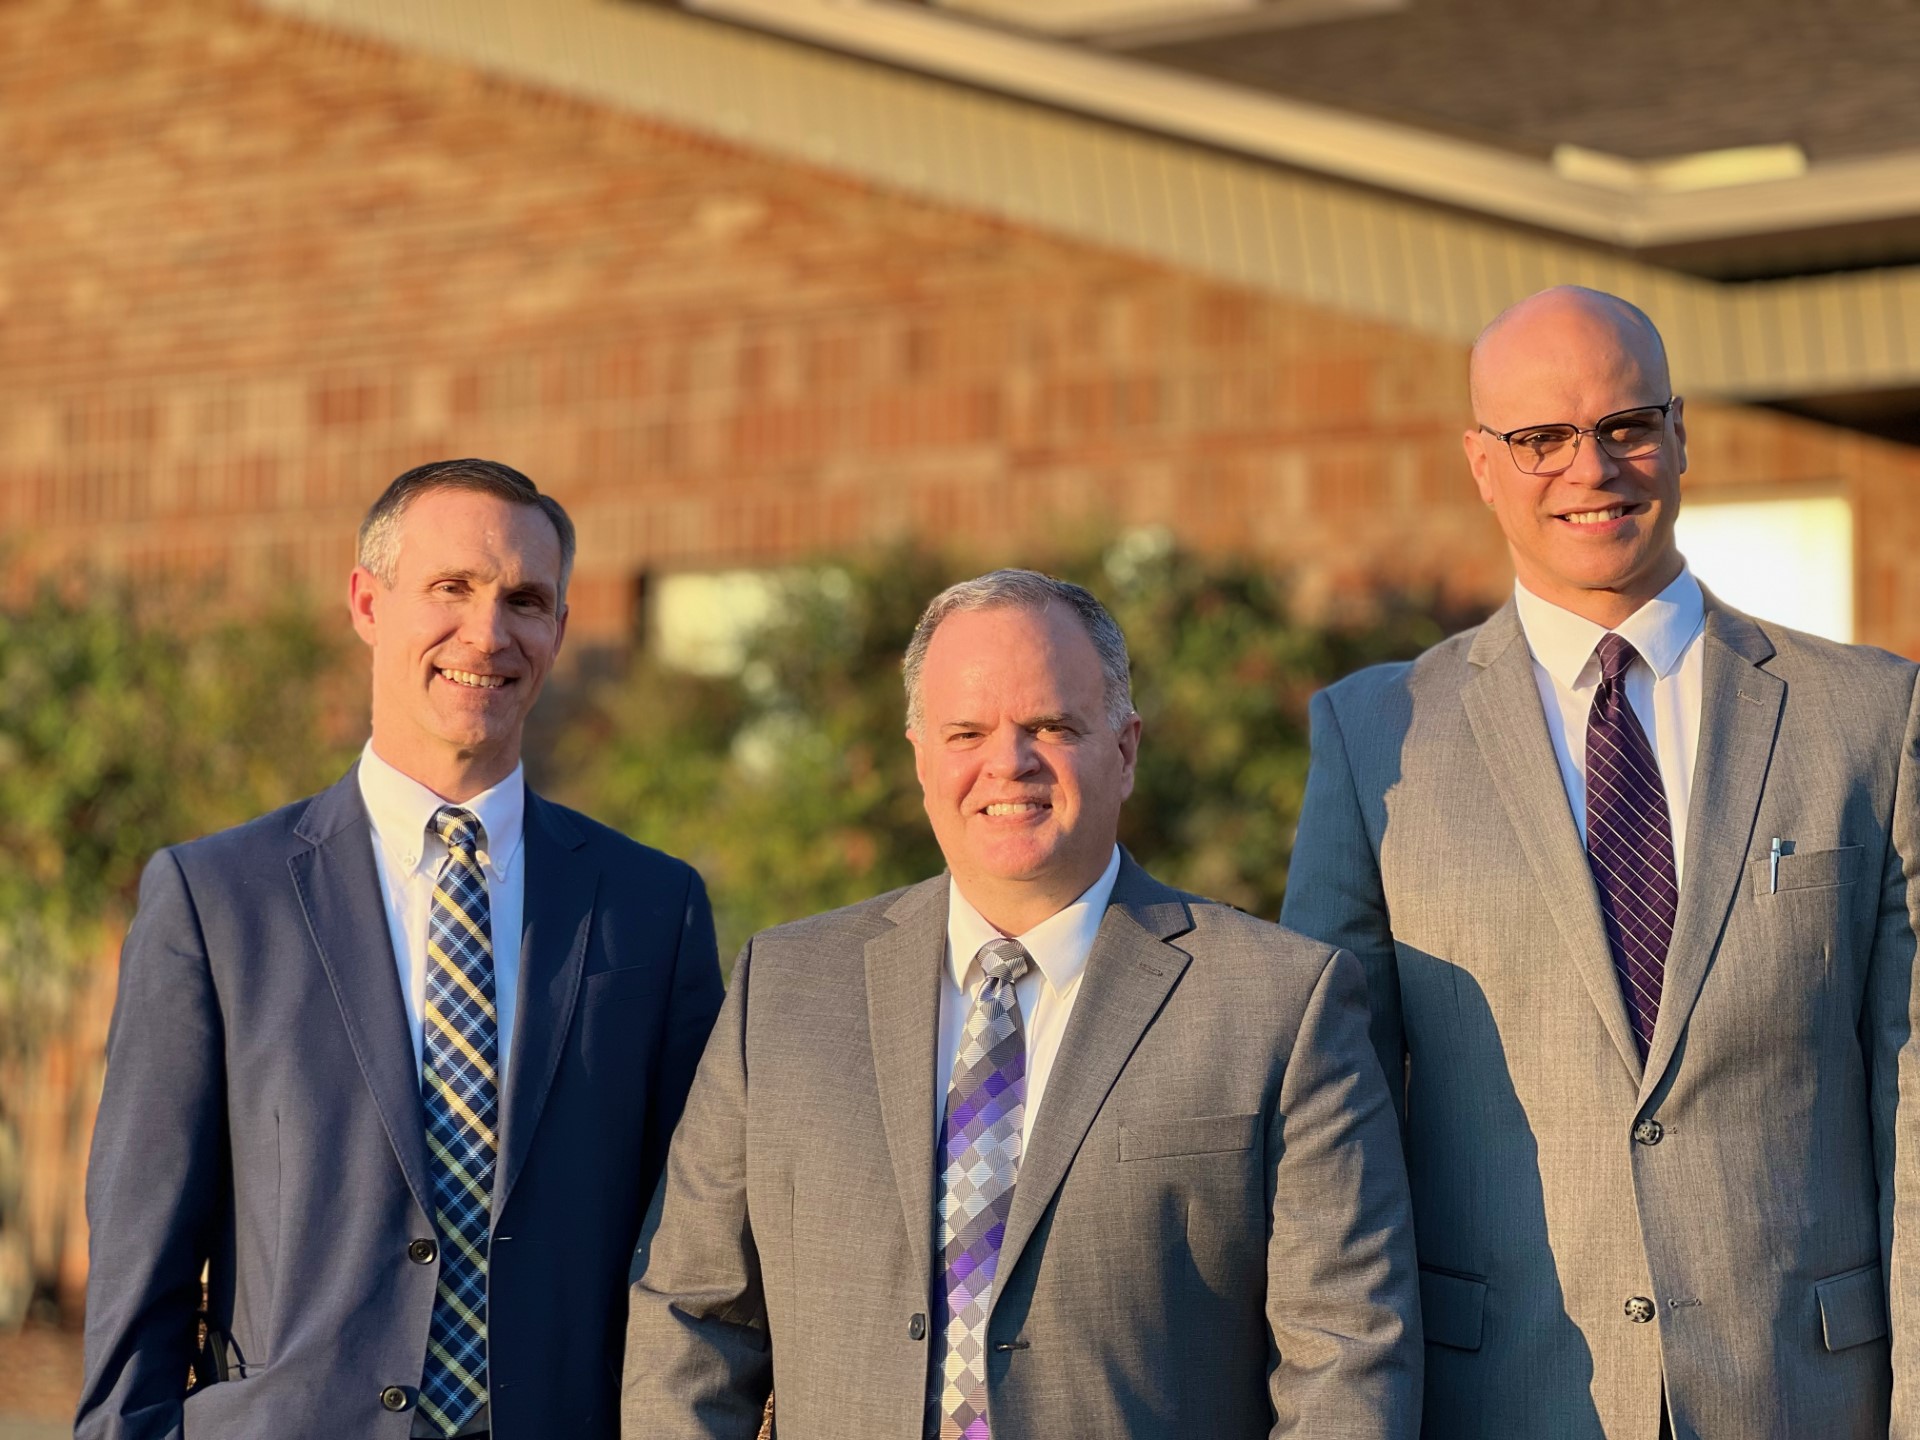 Our Stake Presidency, are open and trustworthy leaders, who are dedicated to making a positive impact in just one life.